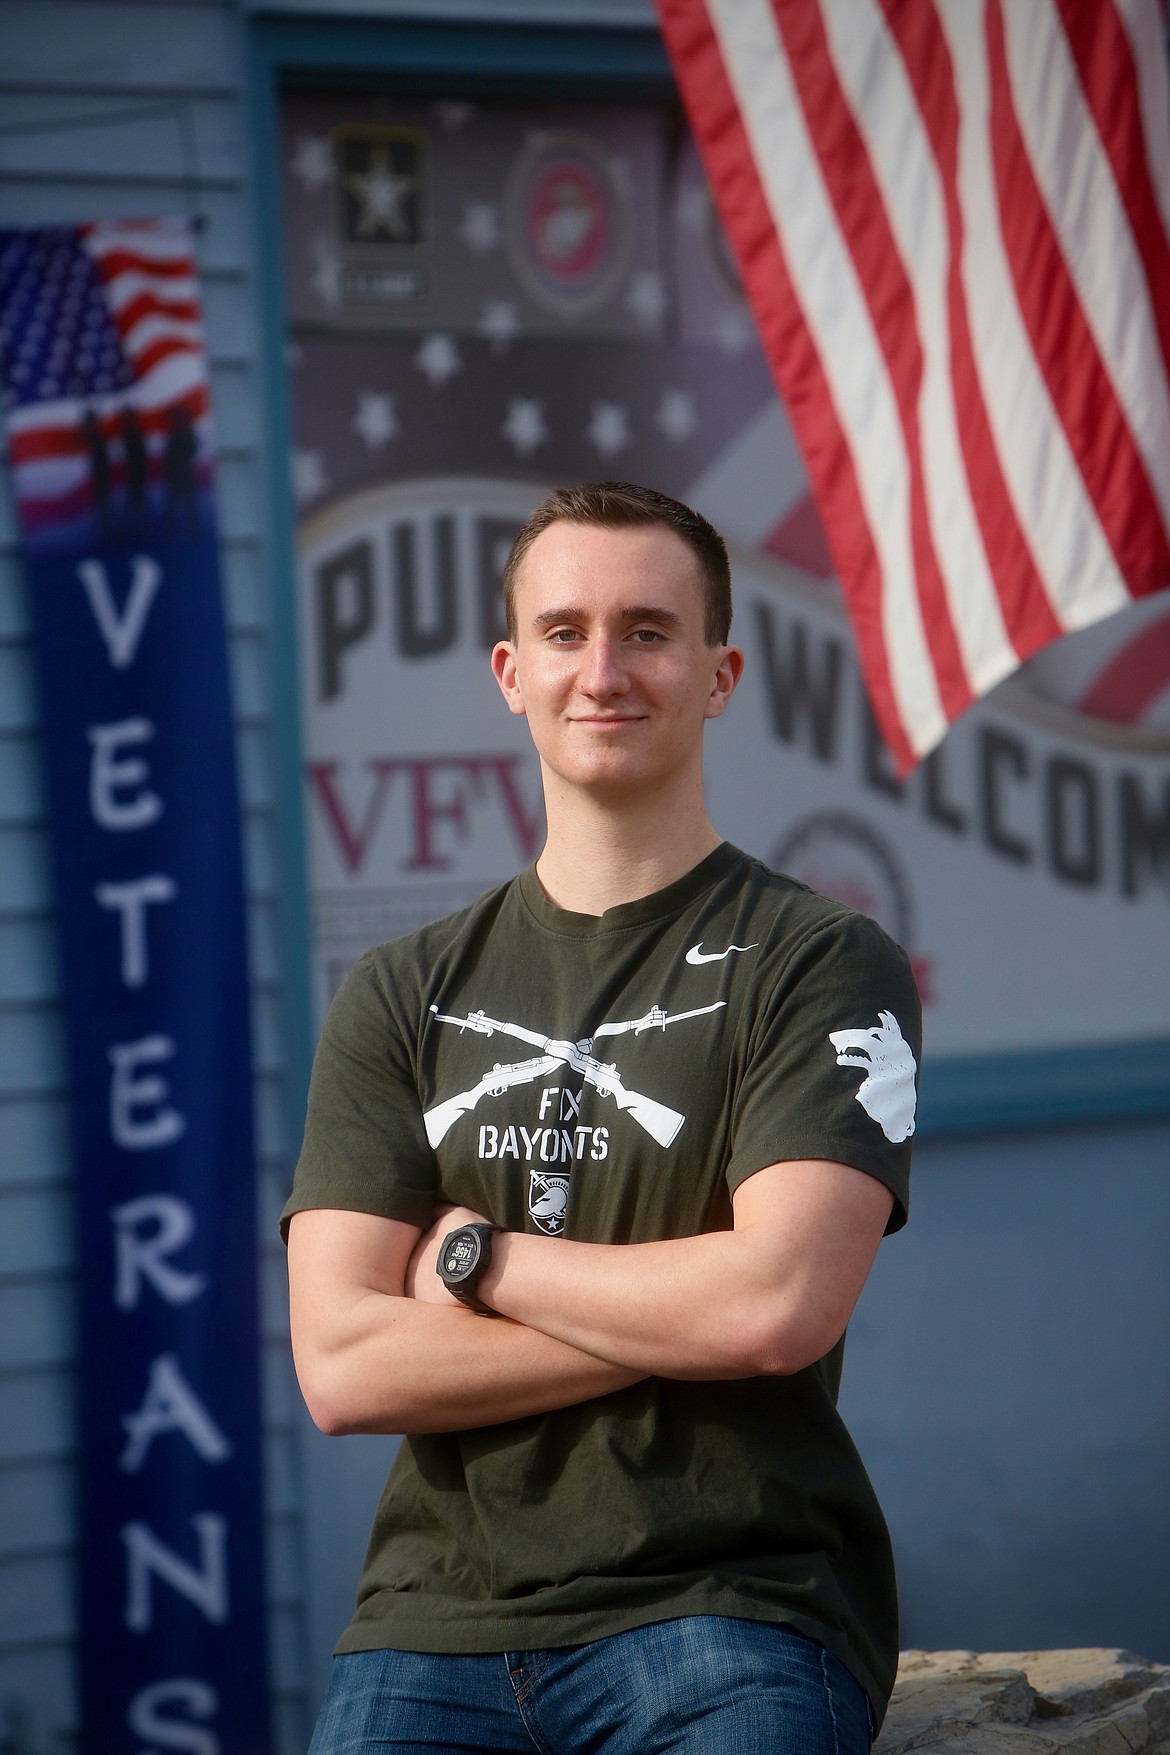 Bigfork's Brandon Wenzel, pictured outside VFW Post 4042, was recently accepted to the U.S. Military Academy at West Point.
Mackenzie Reiss/Bigfork Eagle